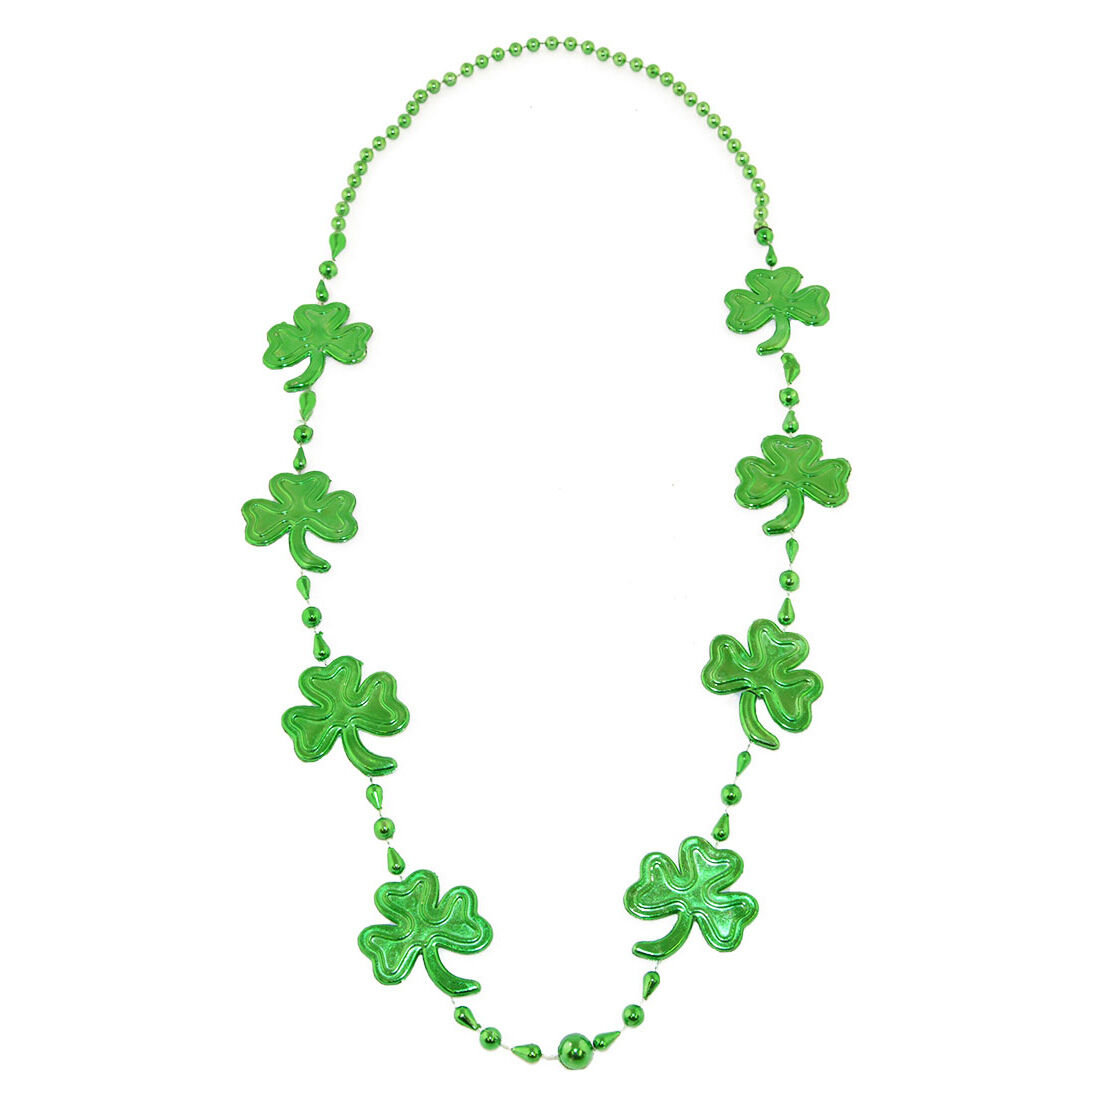 Buy All Green Plastic Bead Necklace With Shamrock Design | Carrolls ...